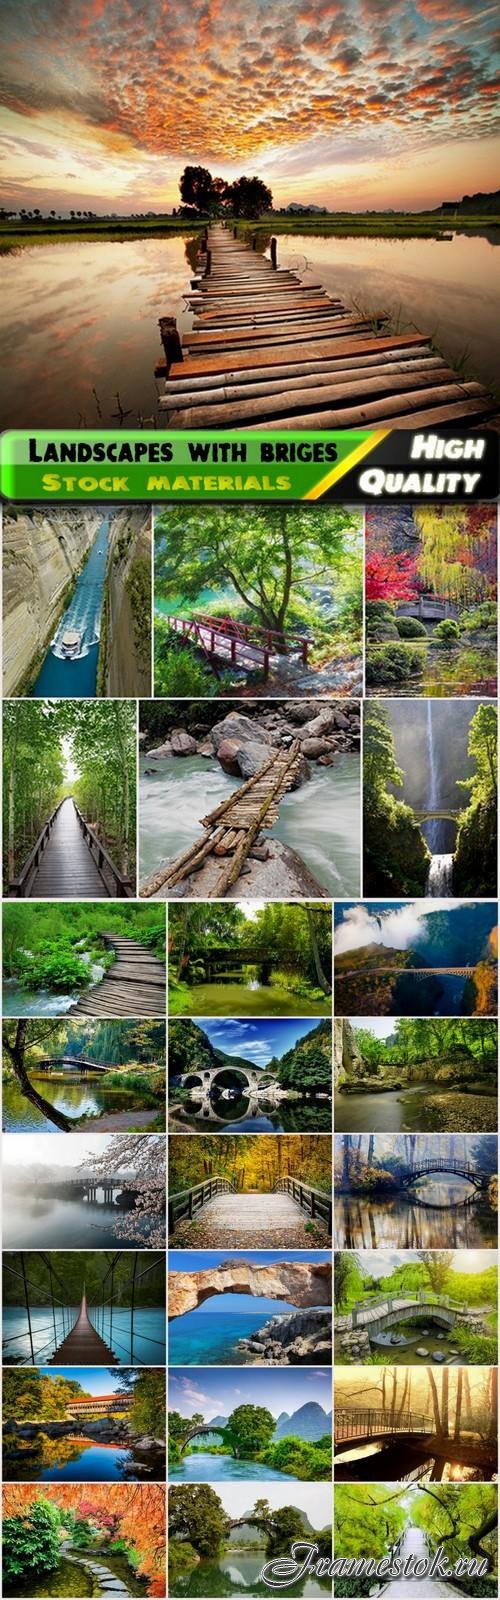 Nature landscapes with briges and rivers - 25 HQ Jpg